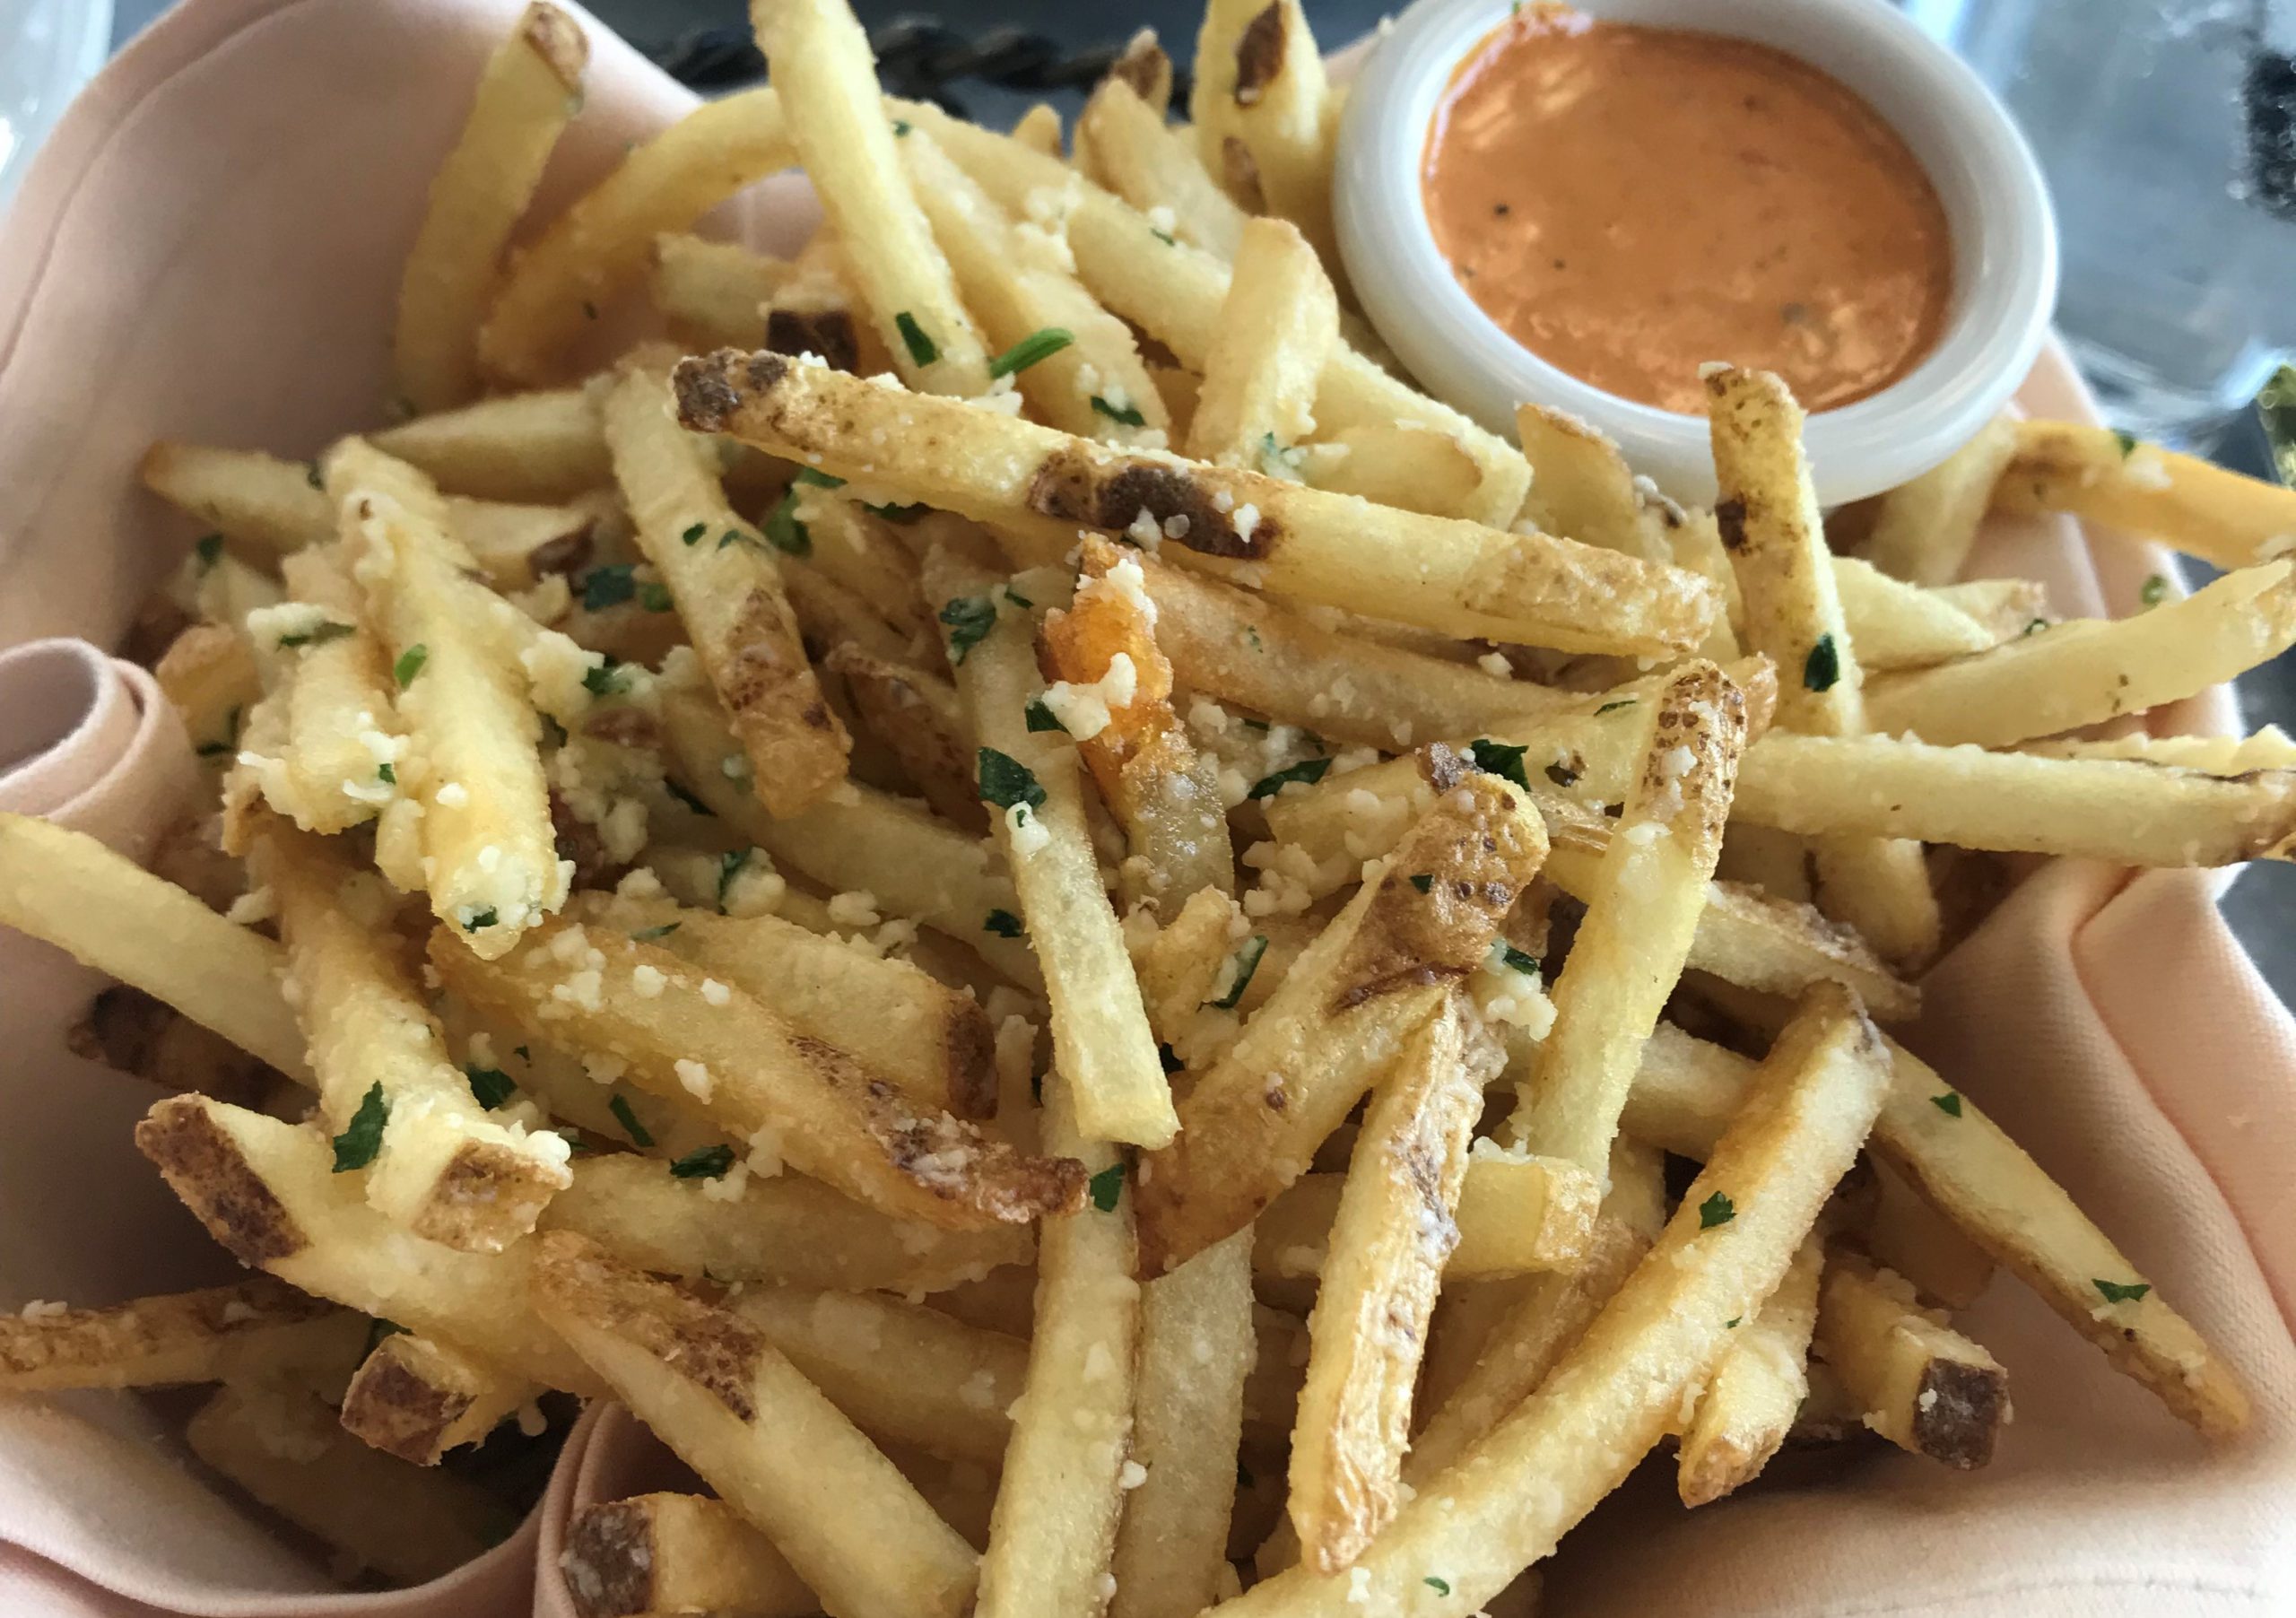 Make Disneyland’s Delicious Pommes Frites from Cafe Orleans